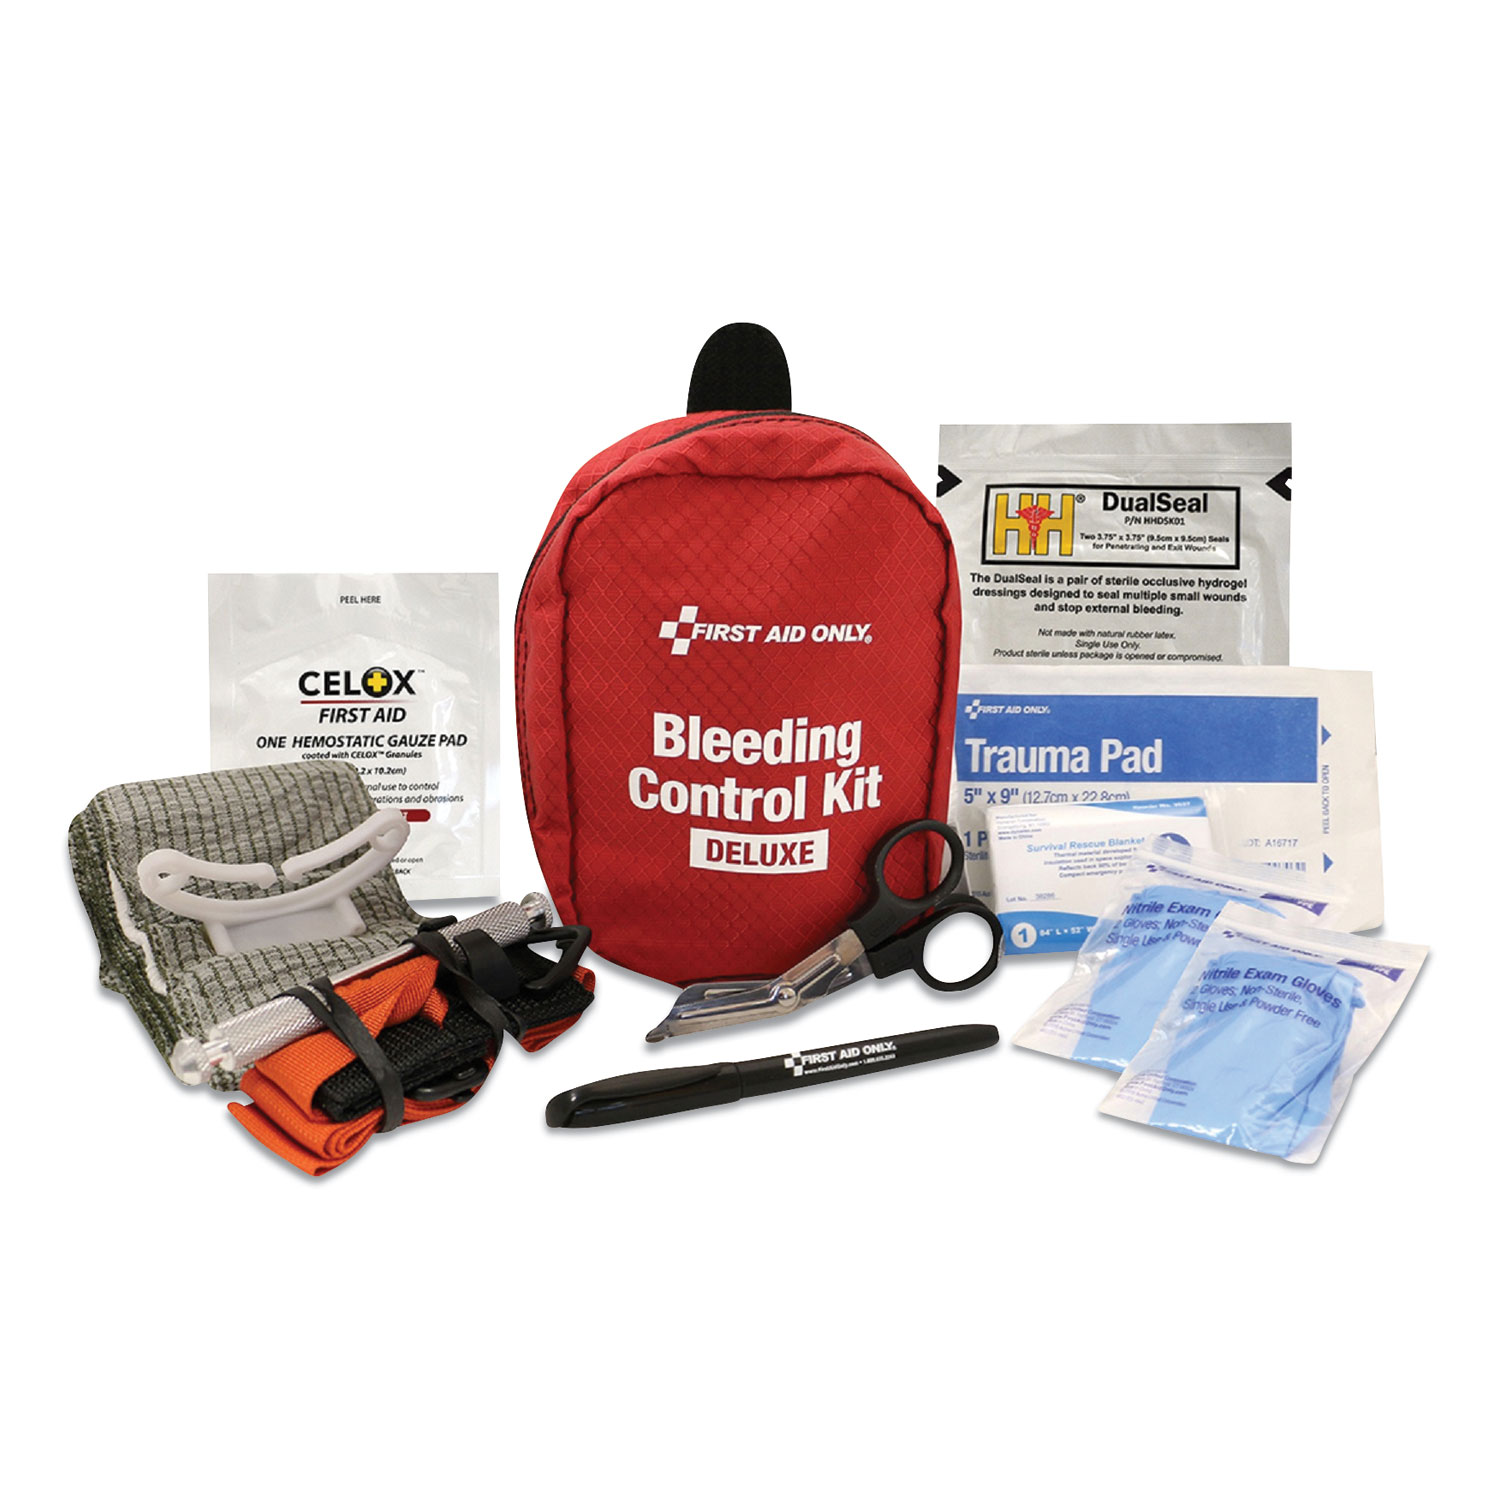 First Aid Only™ Deluxe Pro Bleeding Control Kit, 5 x 7 x 4